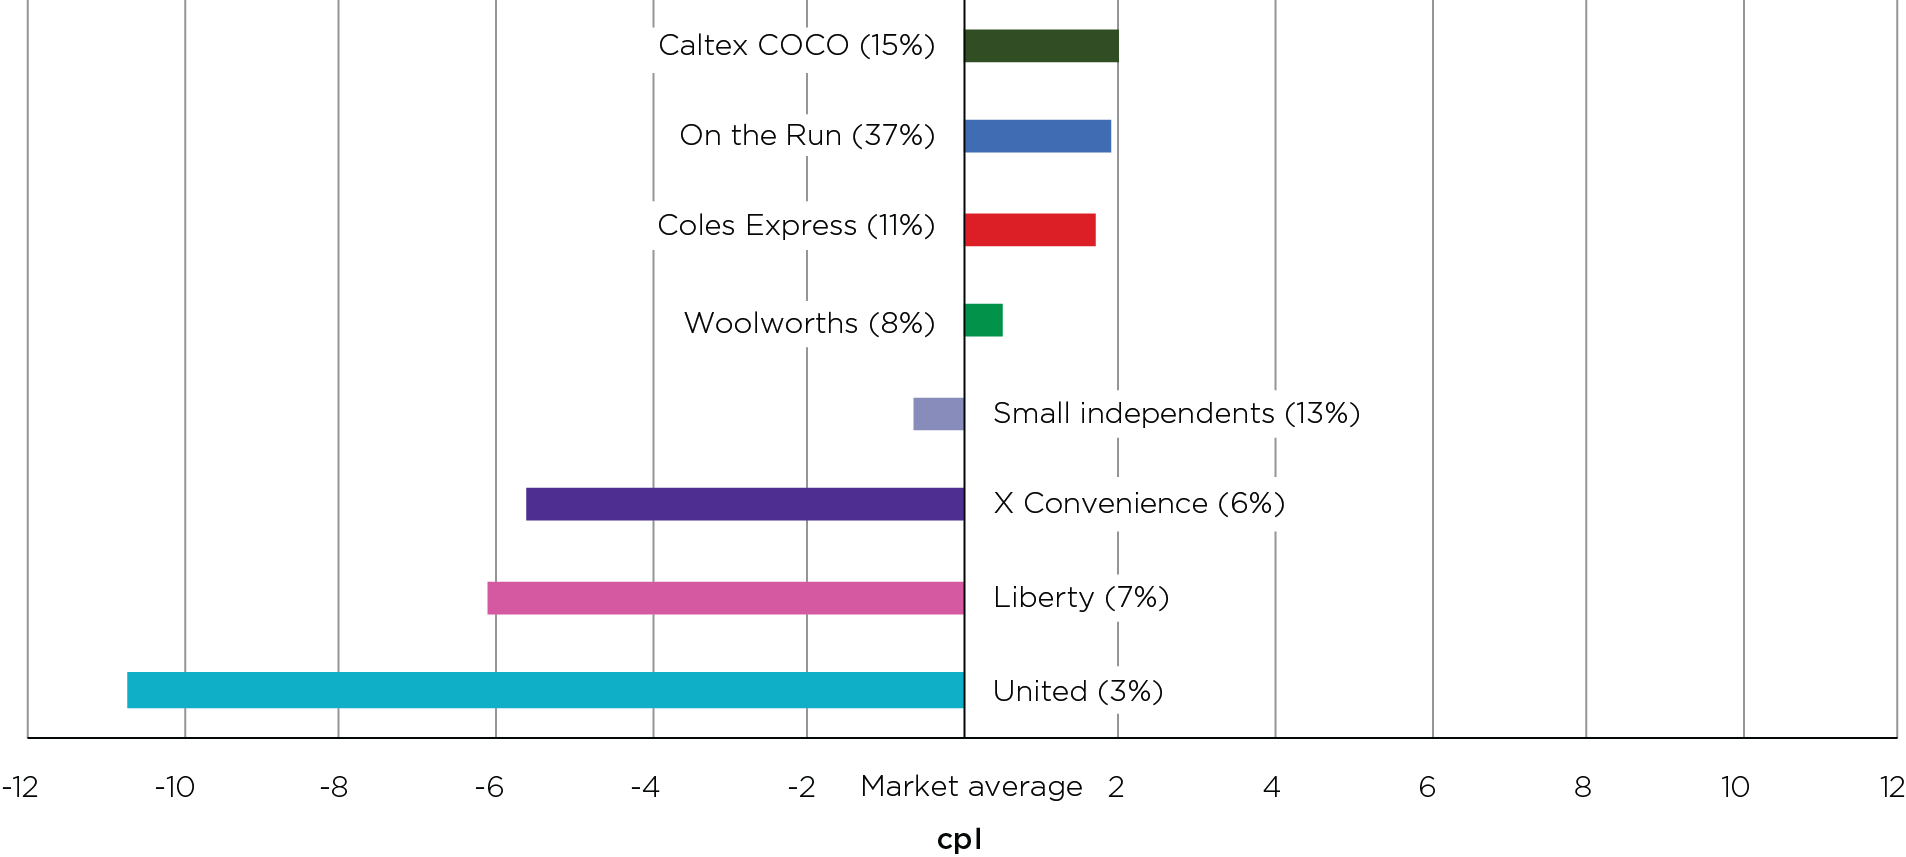 In 2020, Adelaide motorists could have saved 12.7 cents per litre by buying petrol at the lowest-priced retailer, which was United, rather than the highest-priced retailer, which was Caltex COCO.